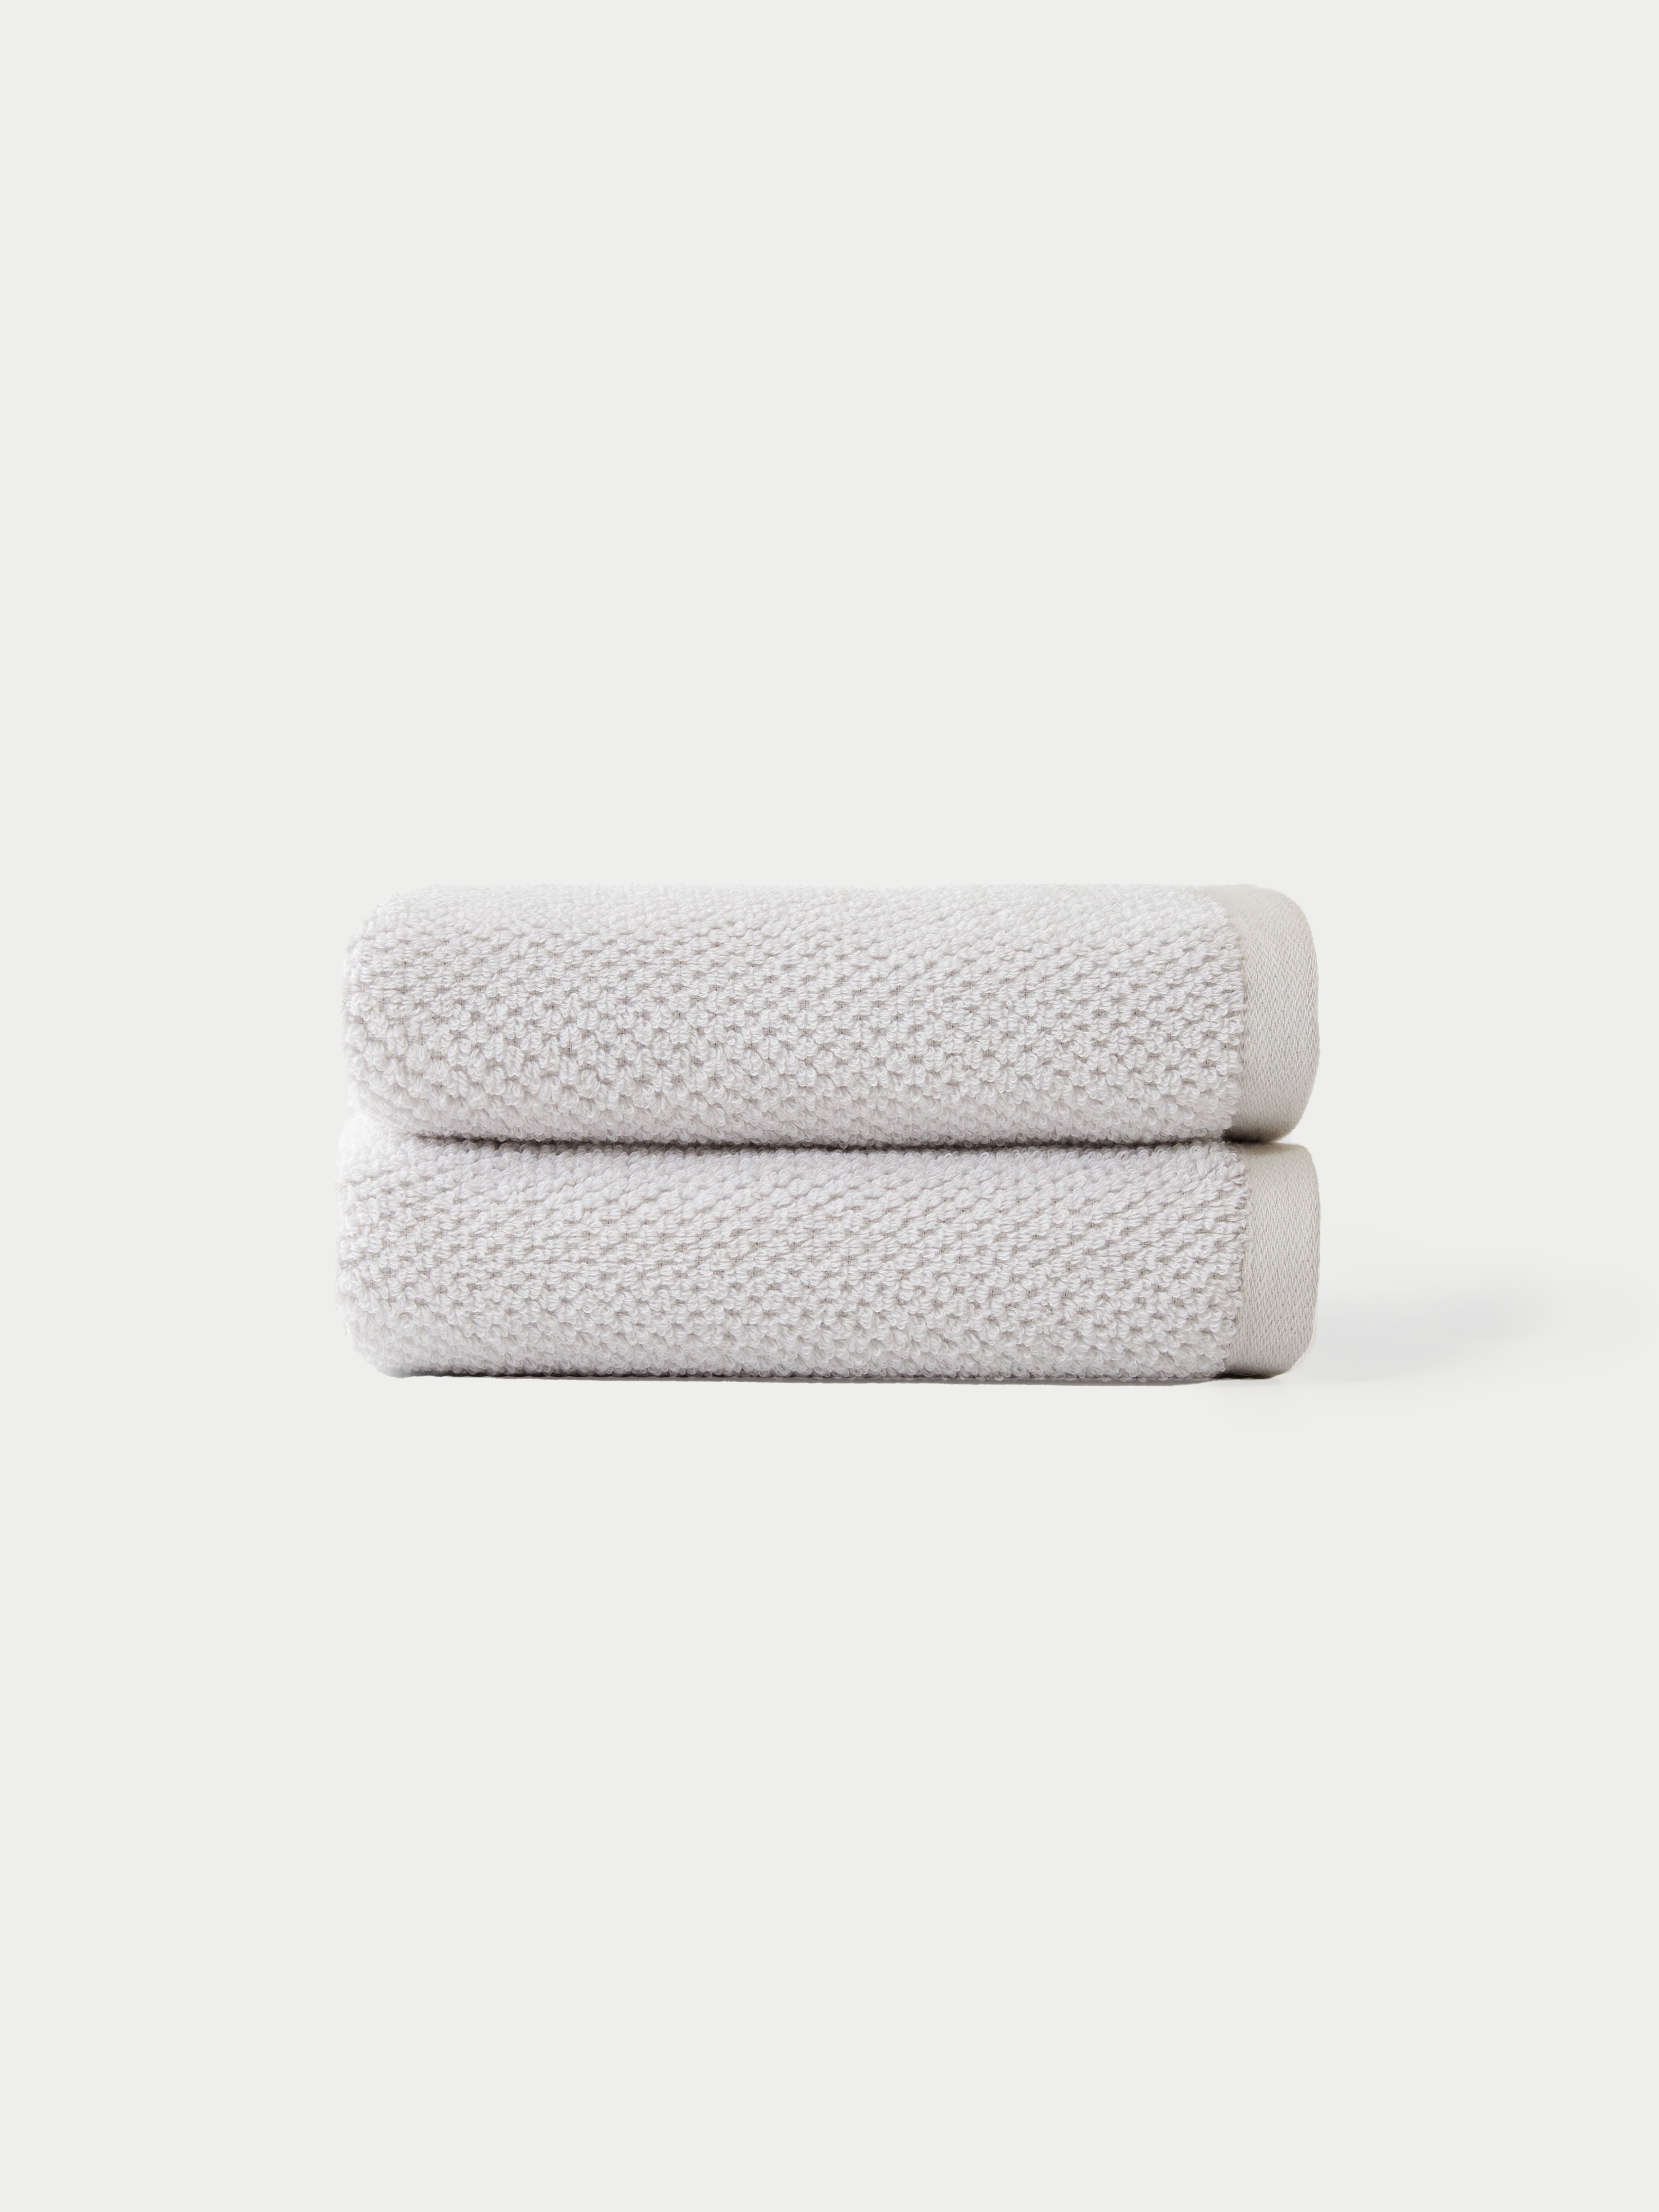 "Nantucket Hand Towels in the color Heathered Light Grey. The Hand Towels are neatly folded. The photo of the Hand Towels was taken with a white background.|Color:Heathered Light Grey